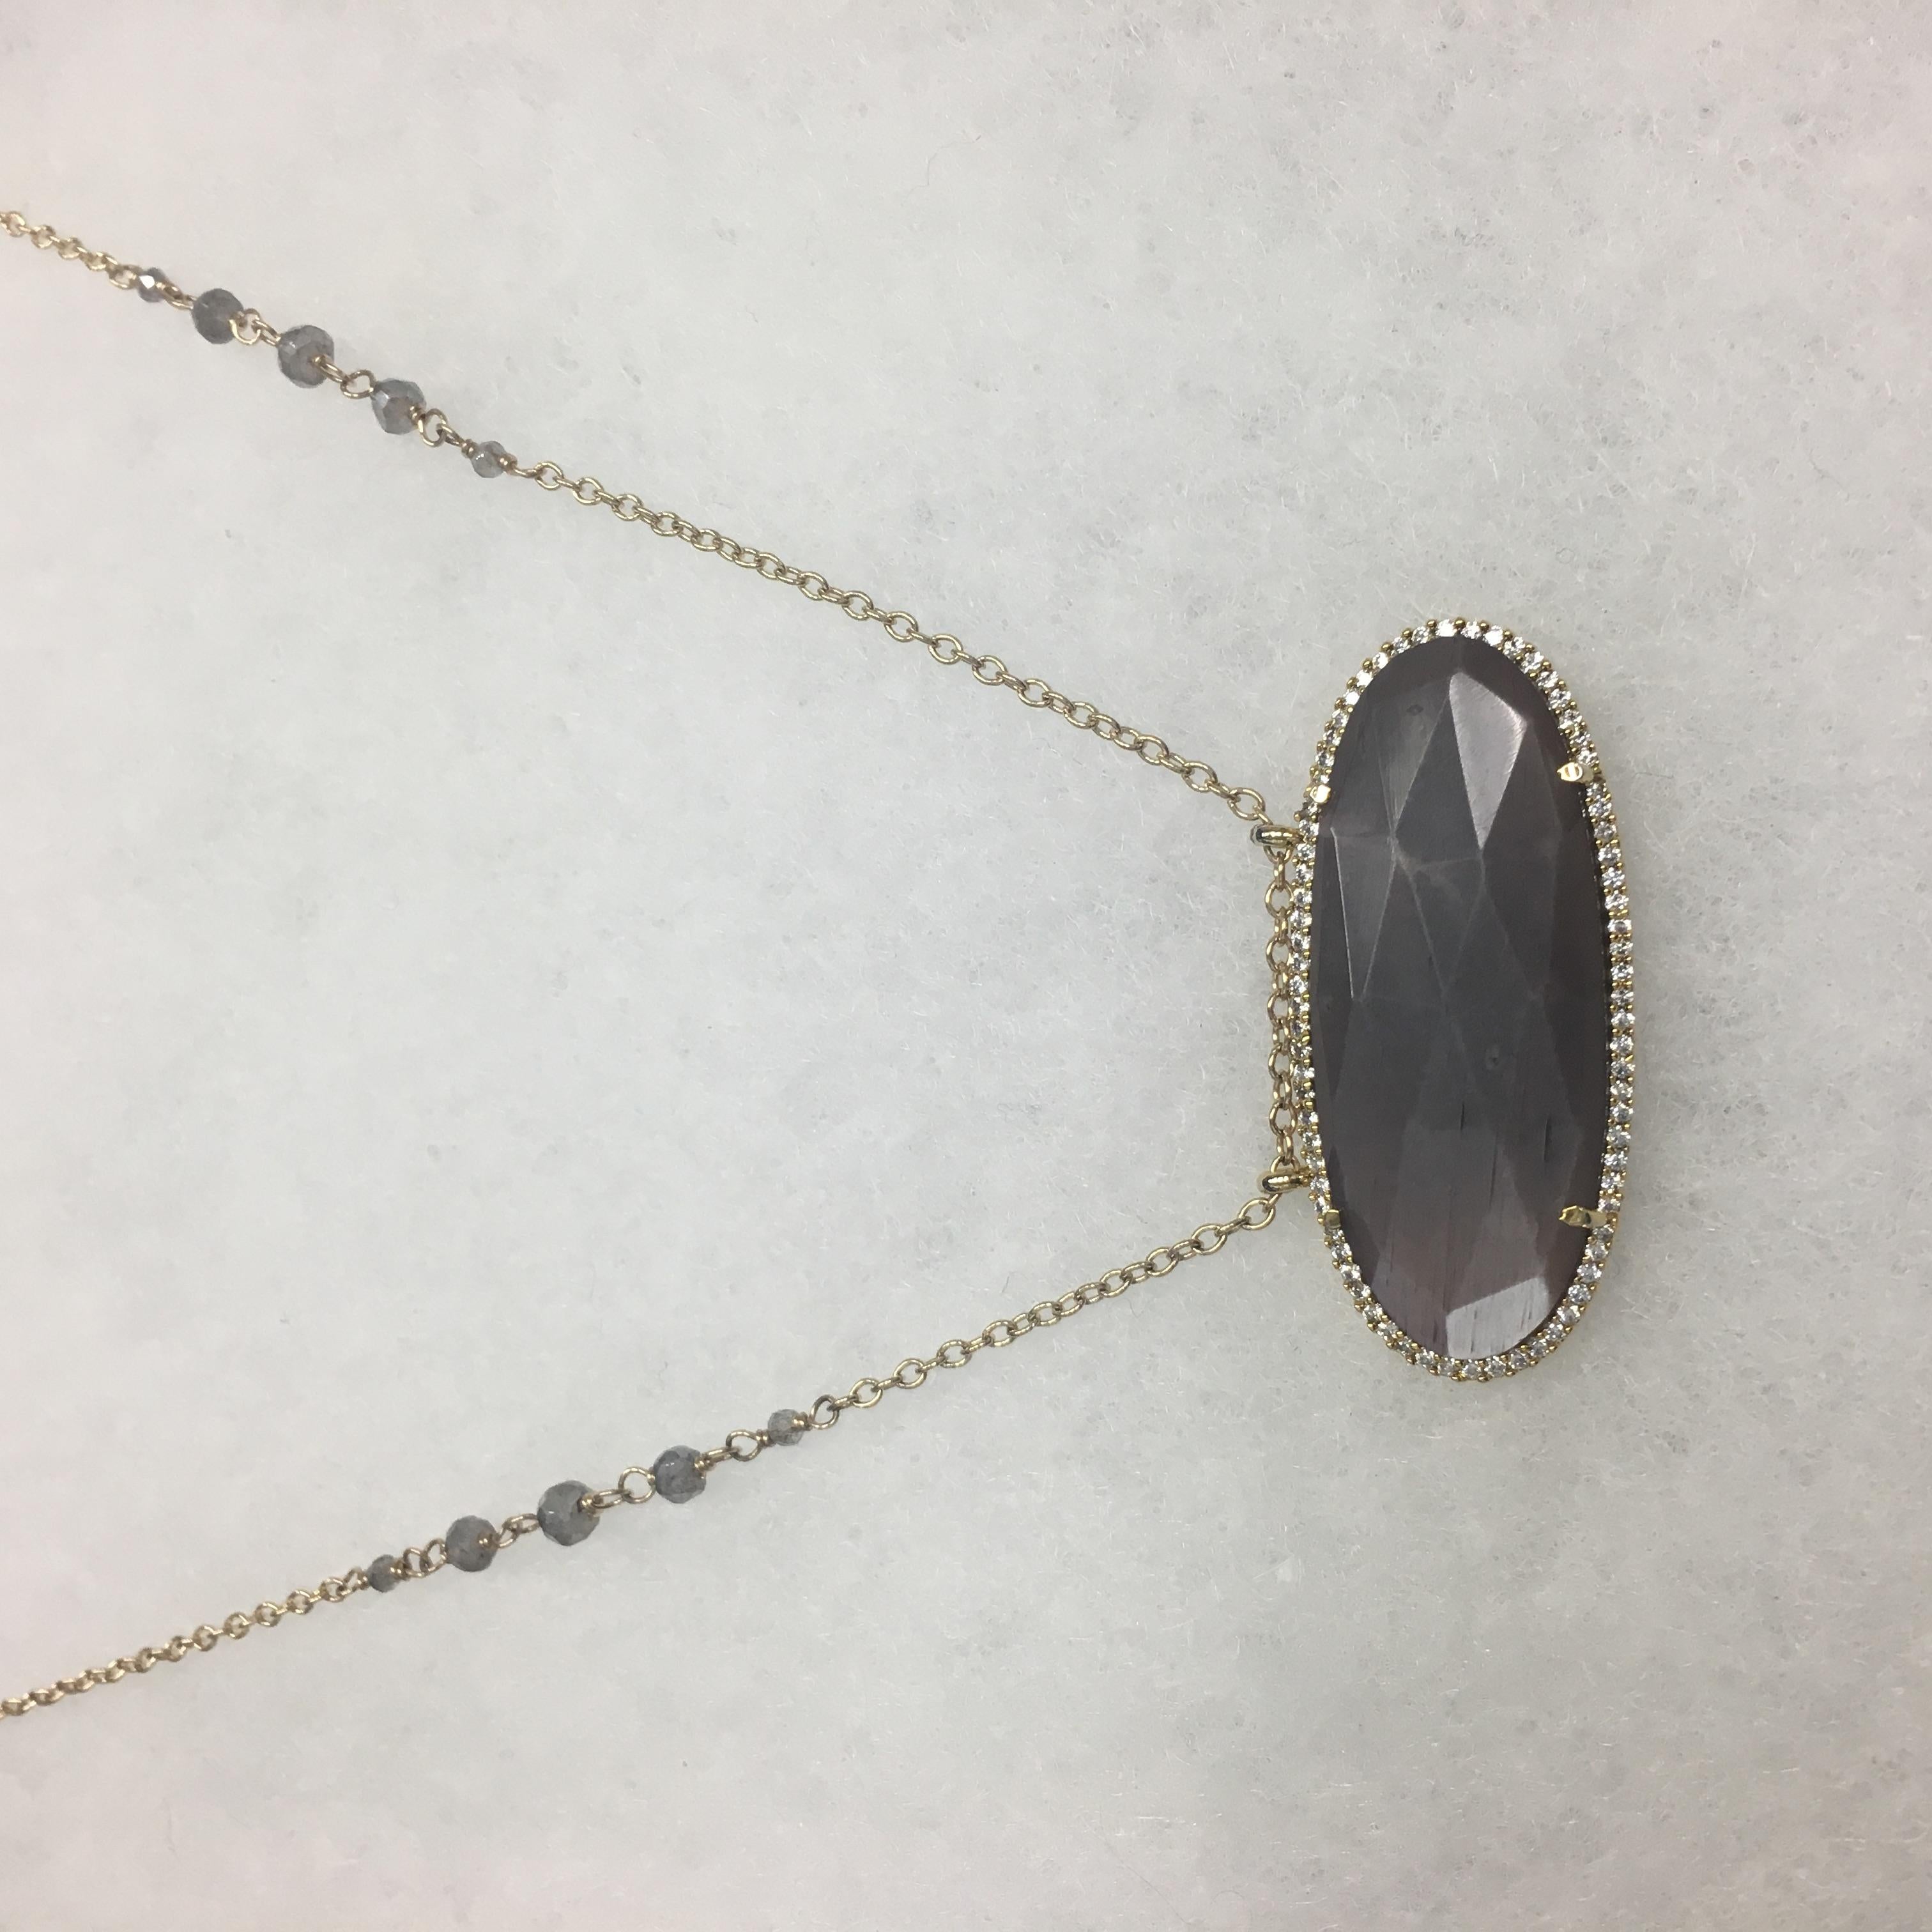 Grey Moonstone and Mystic Labradorite Necklace (one of a kind) - Art by Emily Elaine